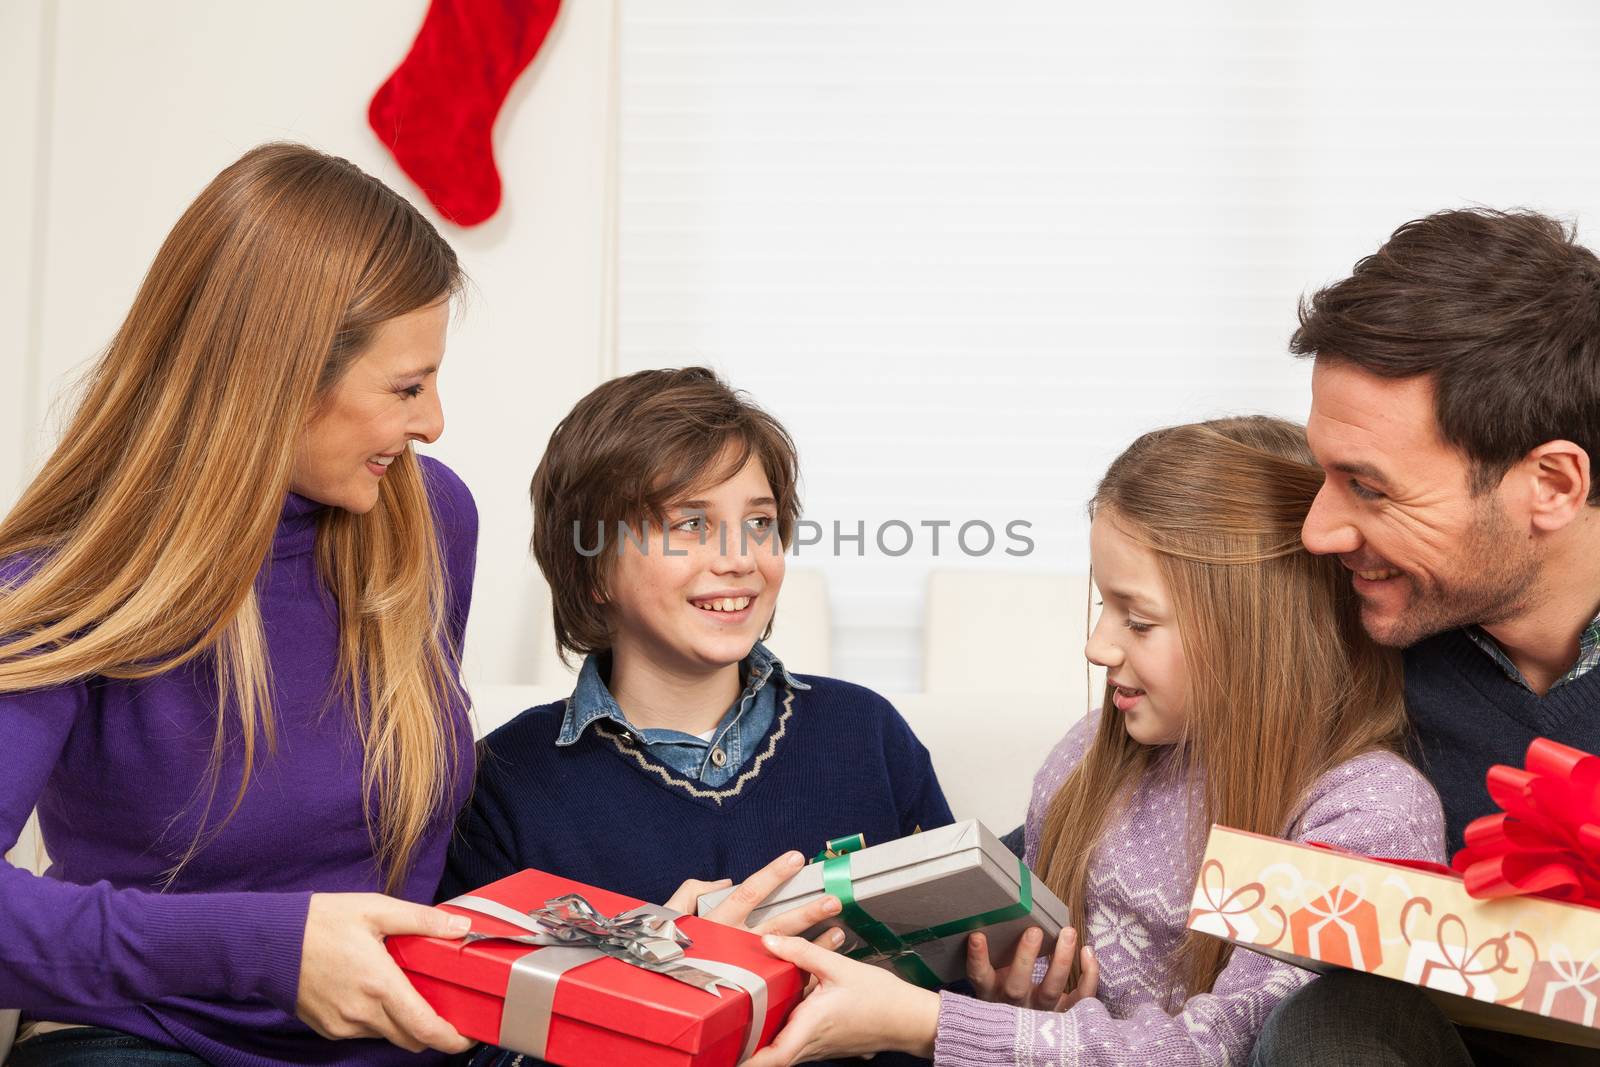 10-12, 30-35, 8-10, adult, boy, caucasian, celebrating, celebration, child, children, christmas, colour, couple, daughter, enjoying, enjoyment, family, father, four, gift, gifts, girl, happiness, happy, holding, holiday, home, horizontal, house, indoors, interior, leisure, lifestyle, living, look, looking, love, loving, mature, men, model, mother, occasion, old, parent, people, present, presents, property, releases, room, sitting, smile, smiling, sofa, son, special, surprise, together, two, women, year, years